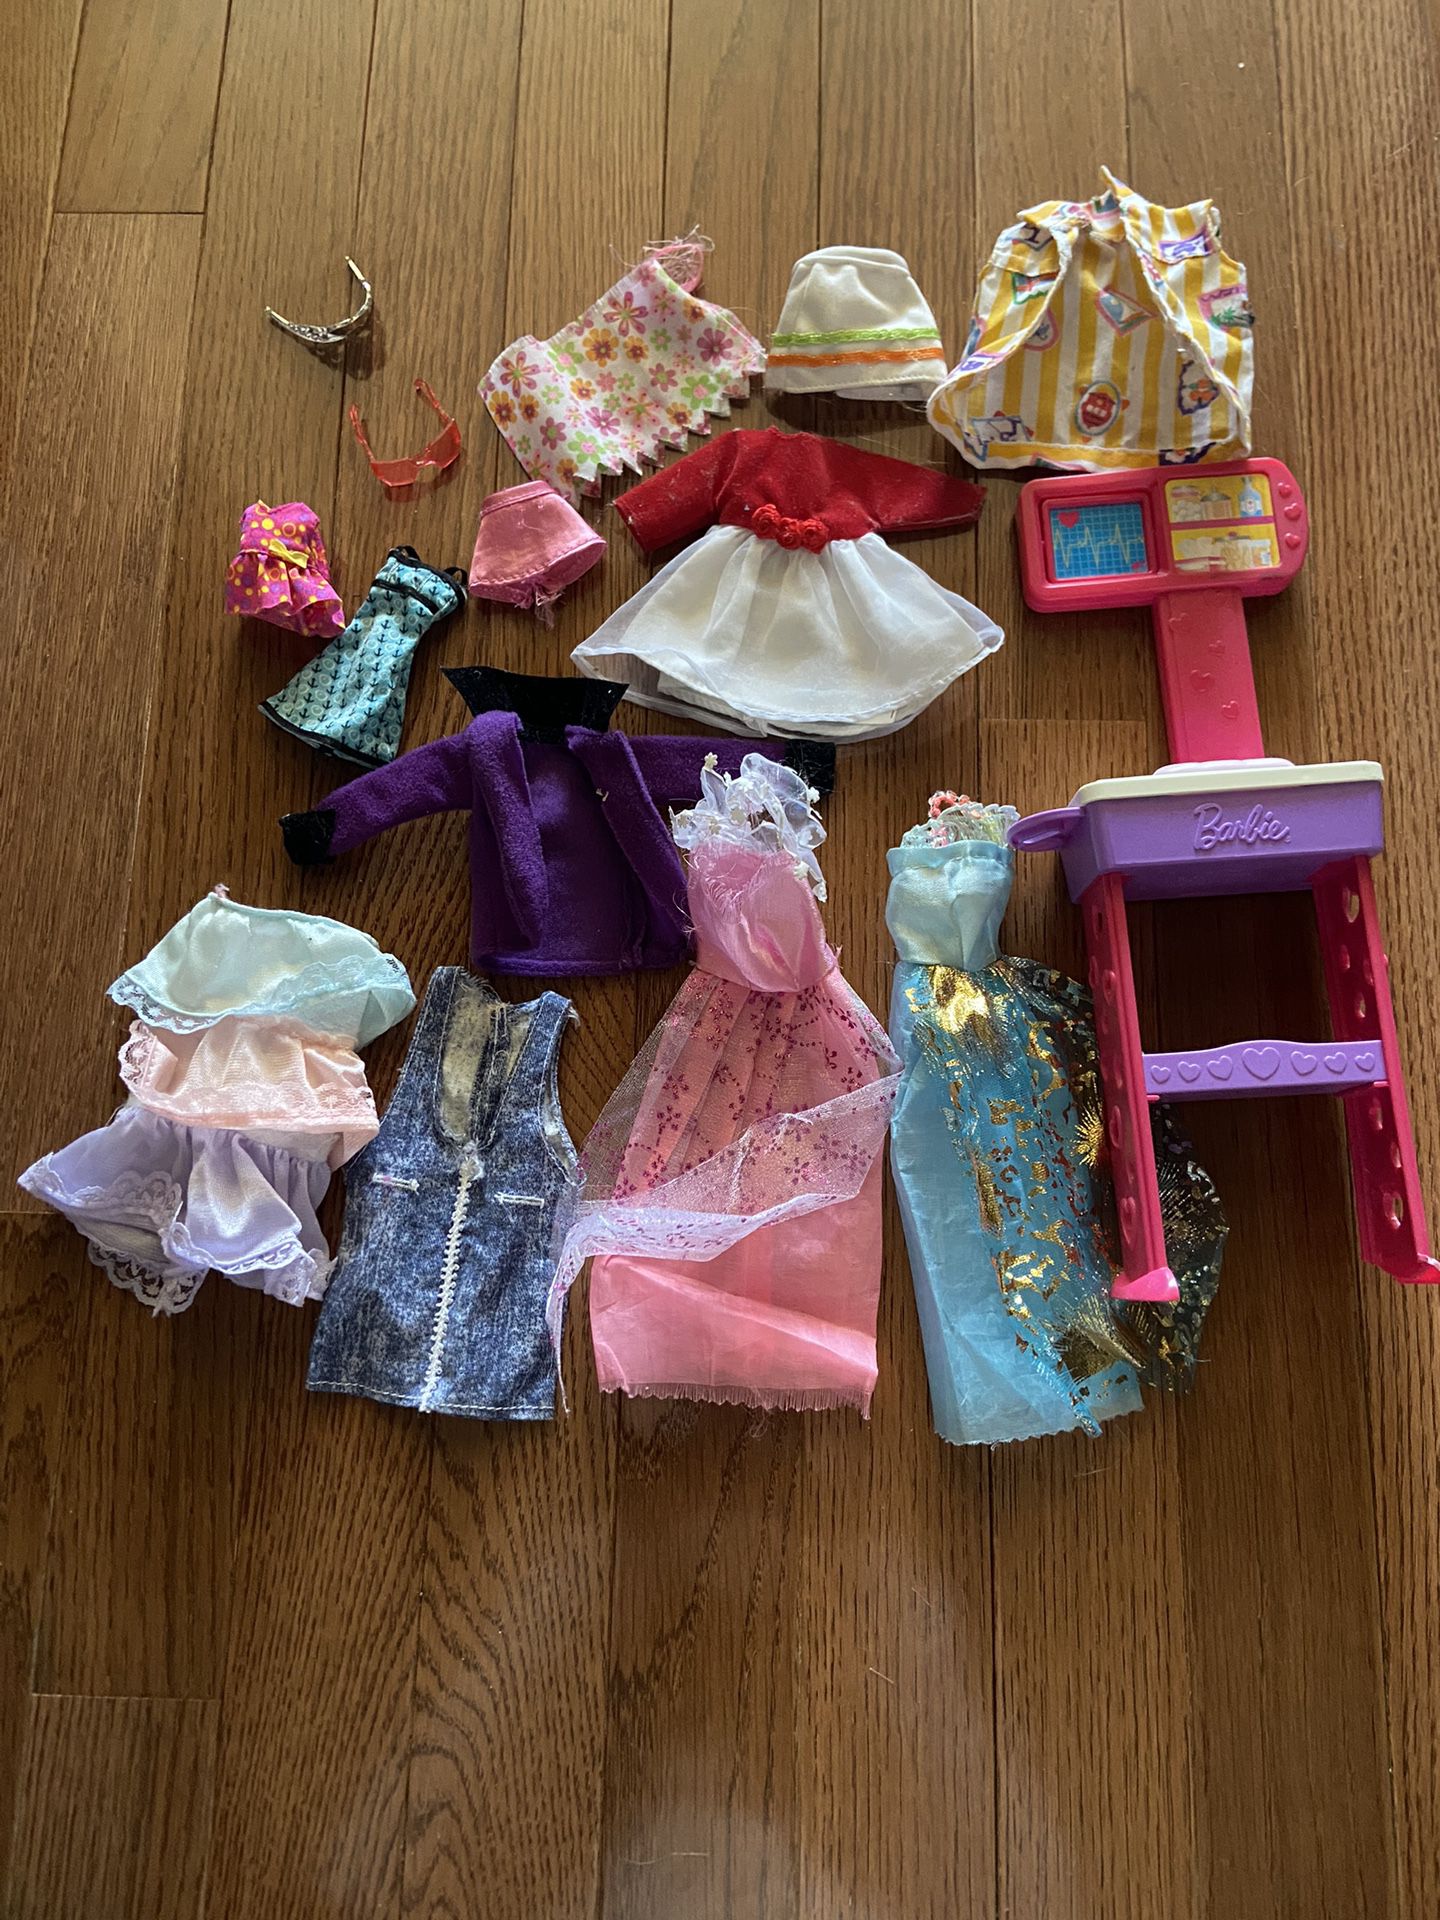 Barbie Items and Clothes